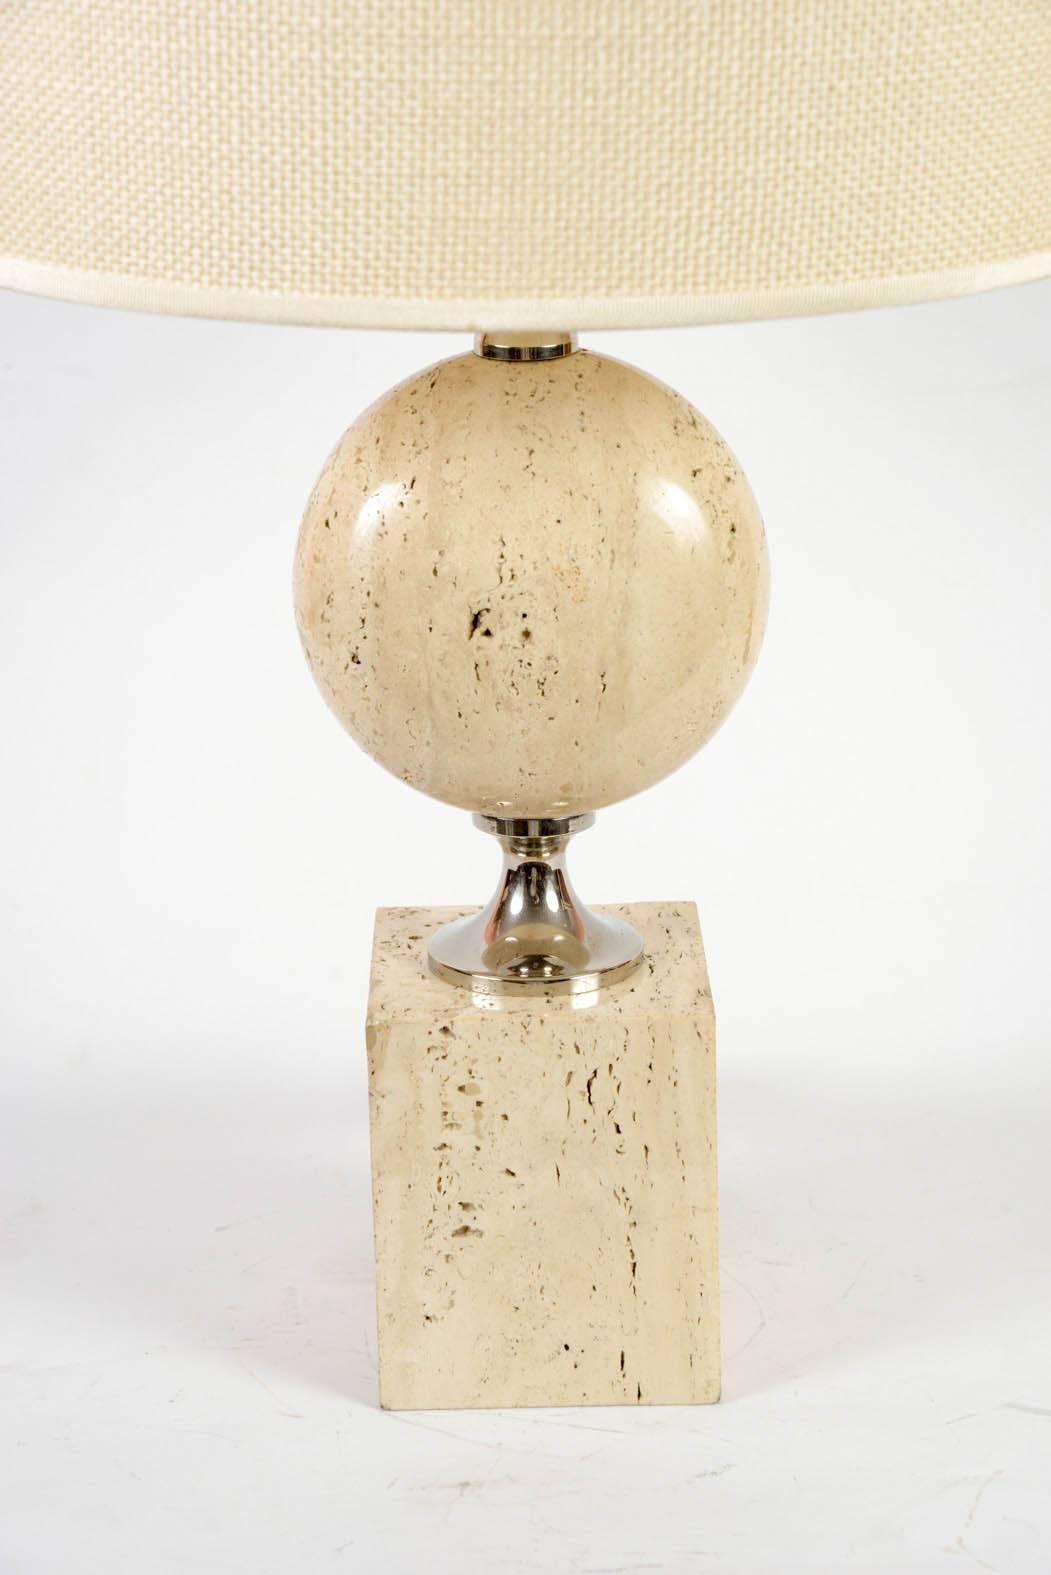 Nice lamp in travertine by Maison Barbier.
Dimensions provided without shade.
No shade provided.